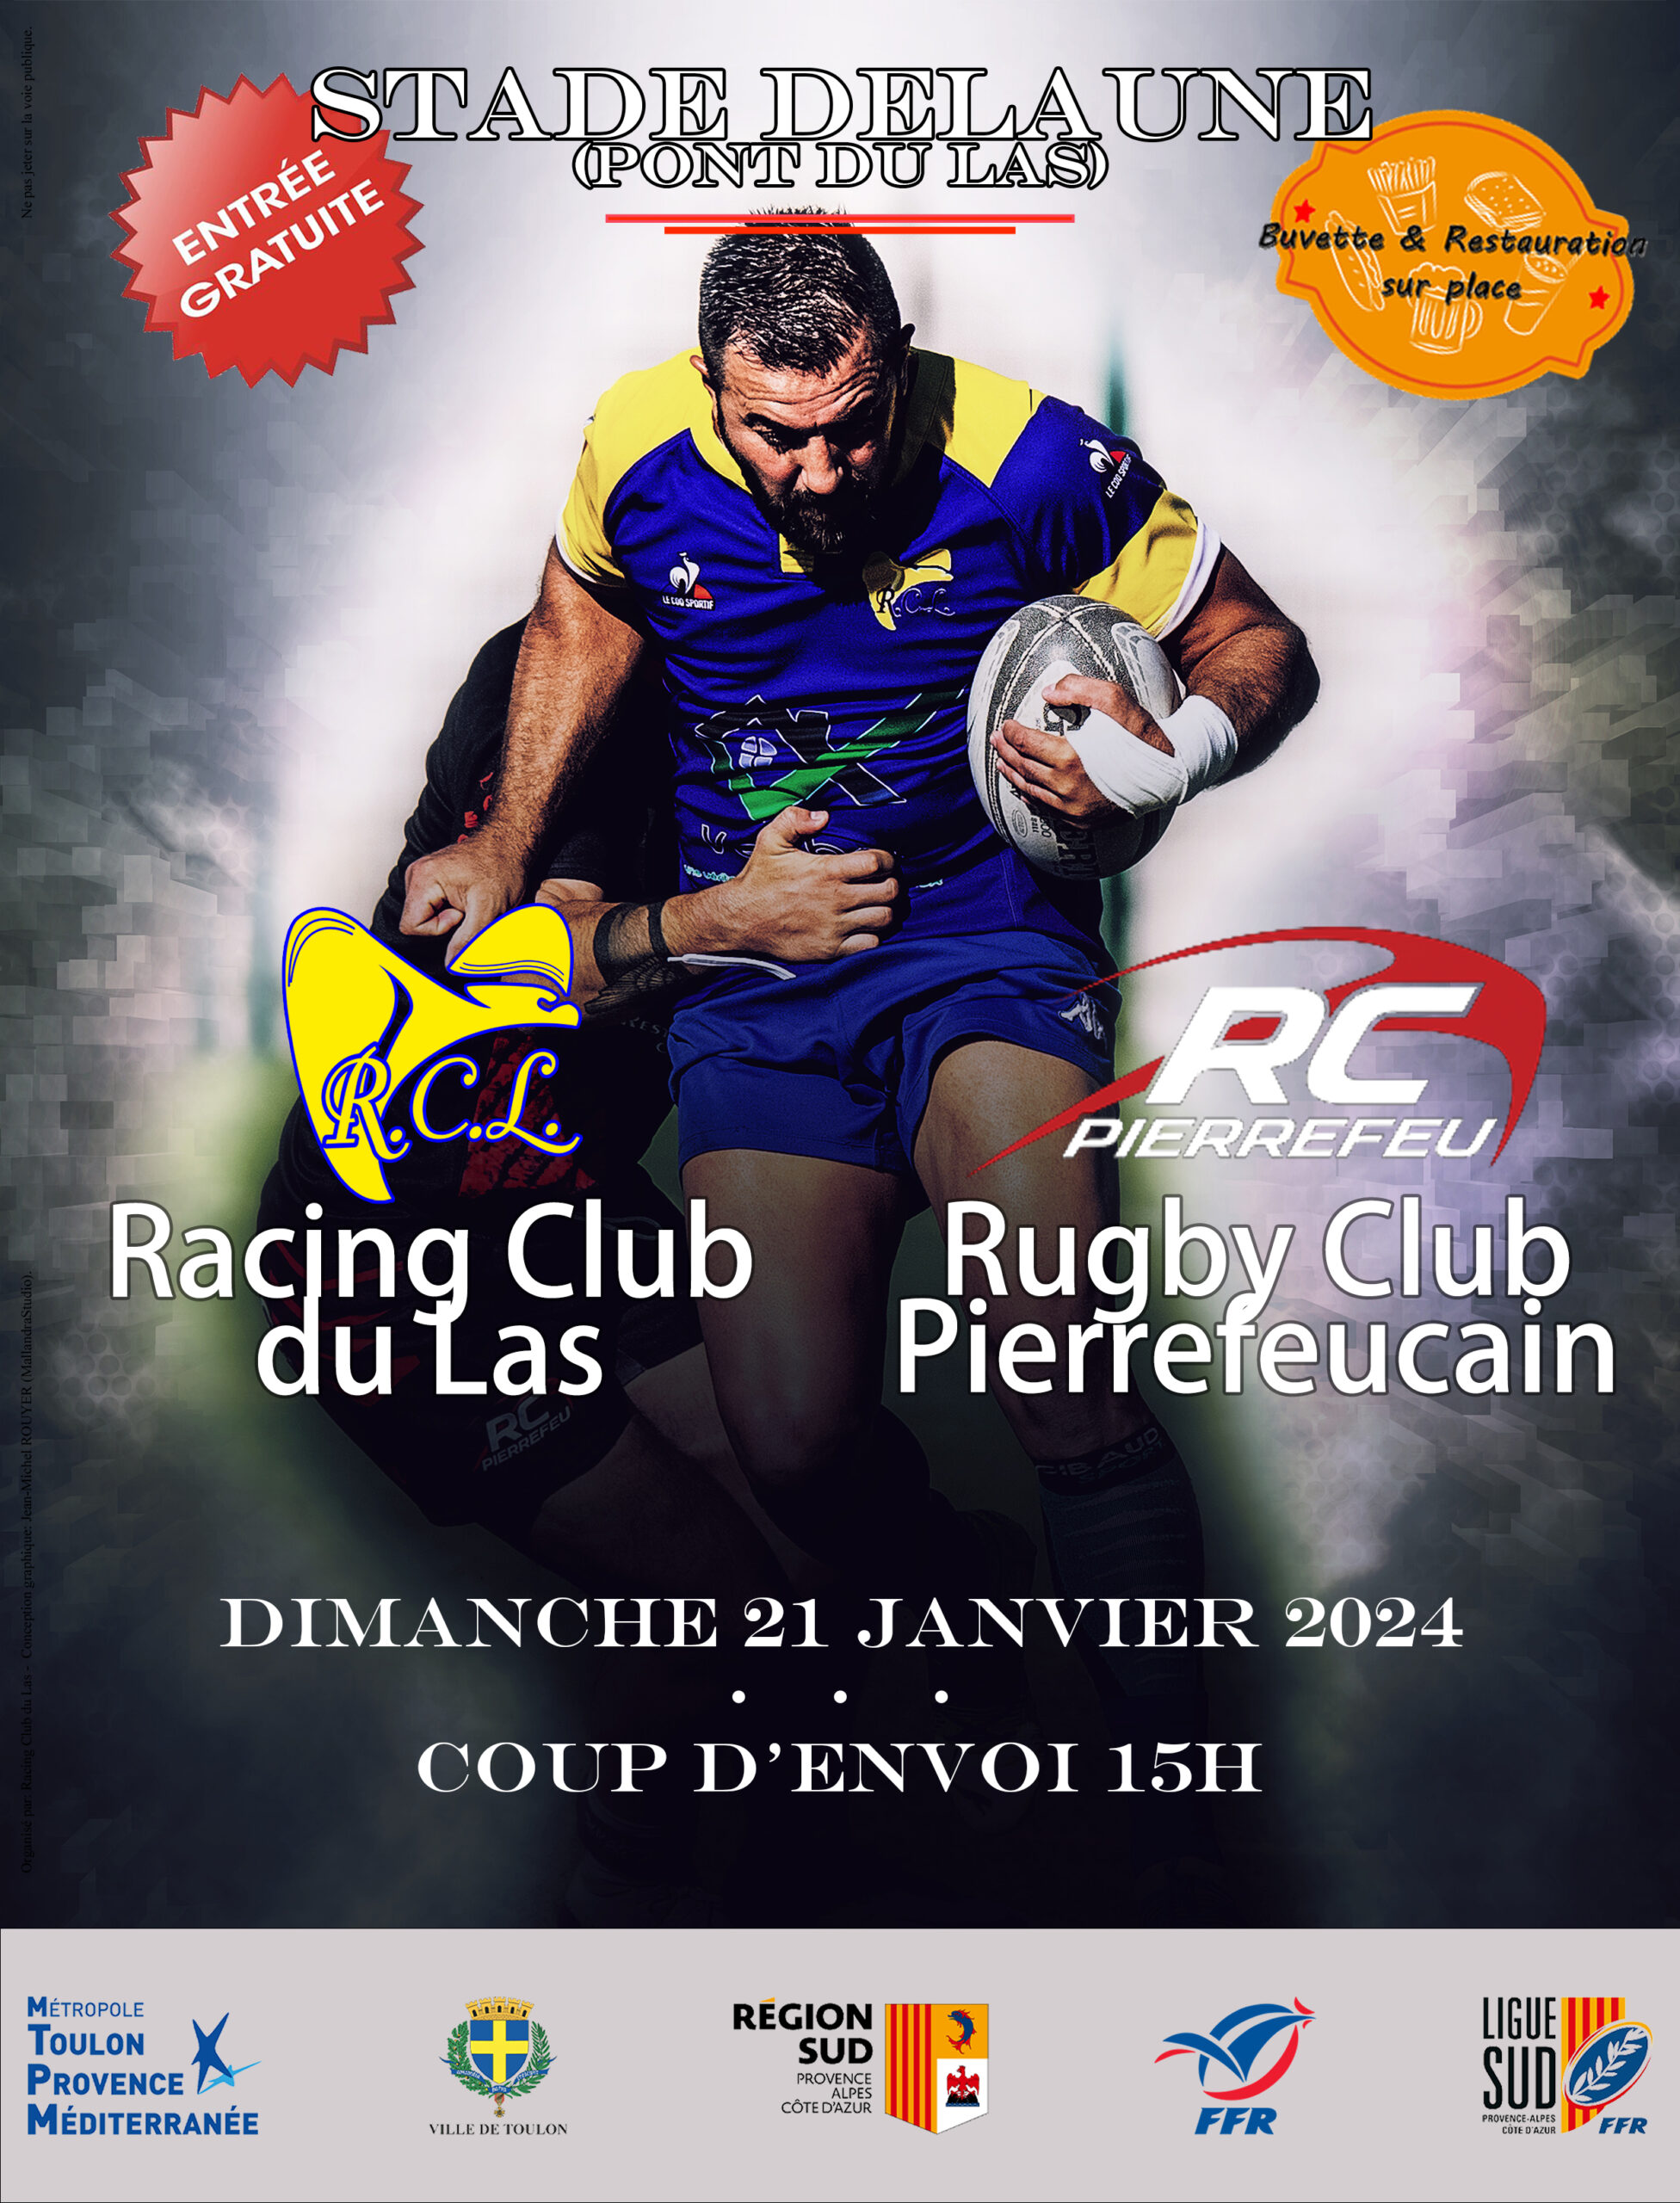 Featured image for “Réception Rugby Club Pierrefeucain”